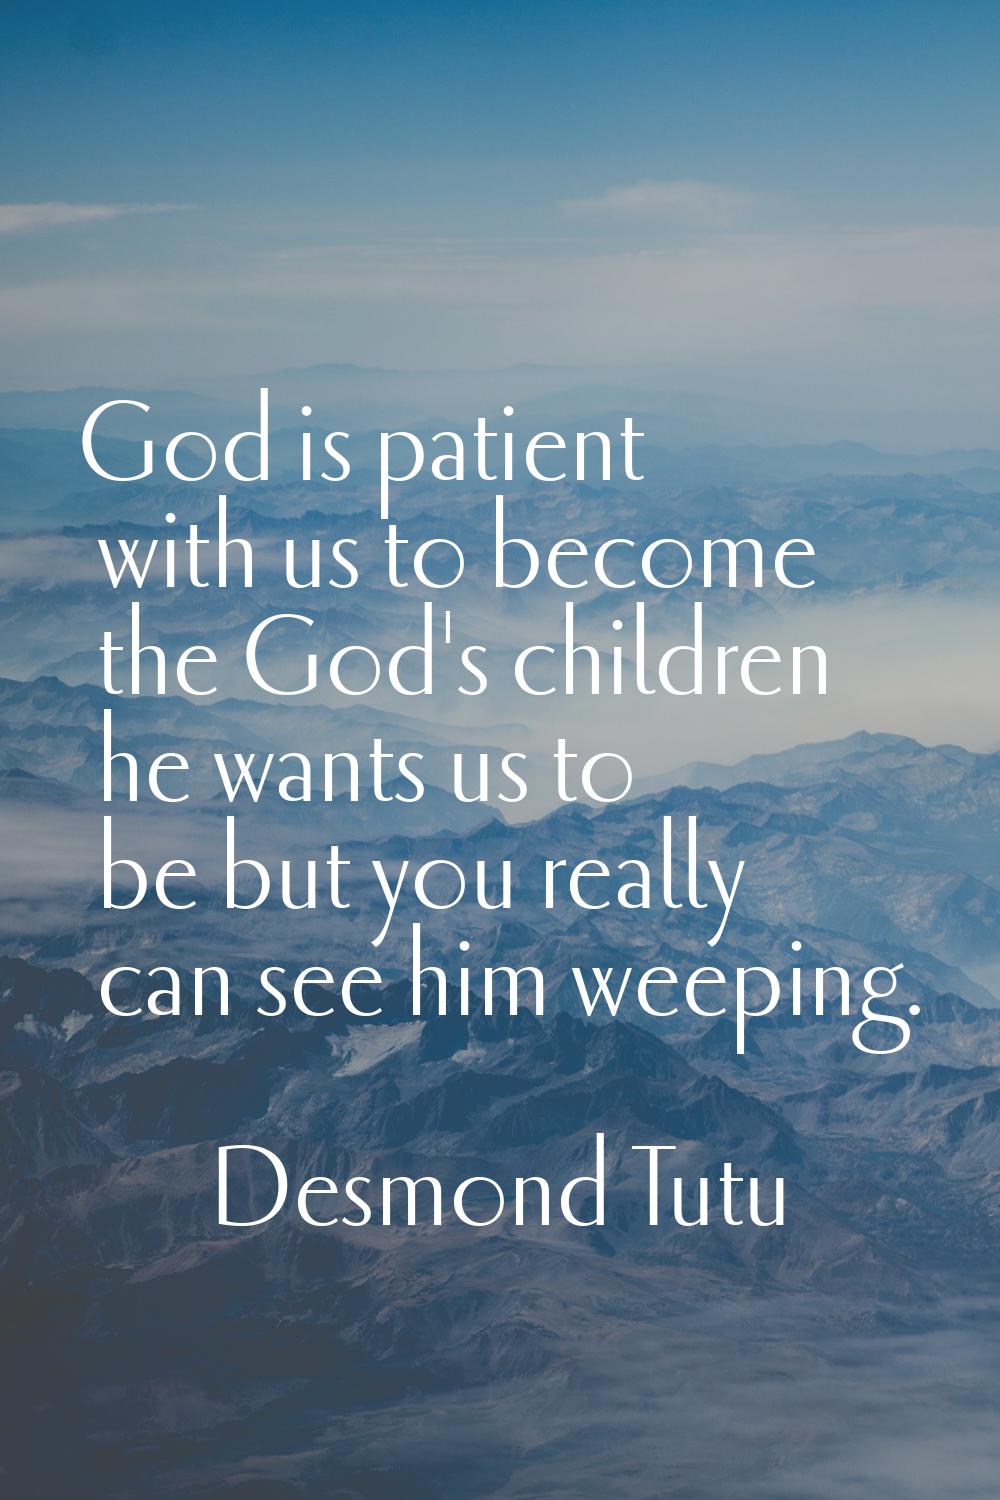 God is patient with us to become the God's children he wants us to be but you really can see him we